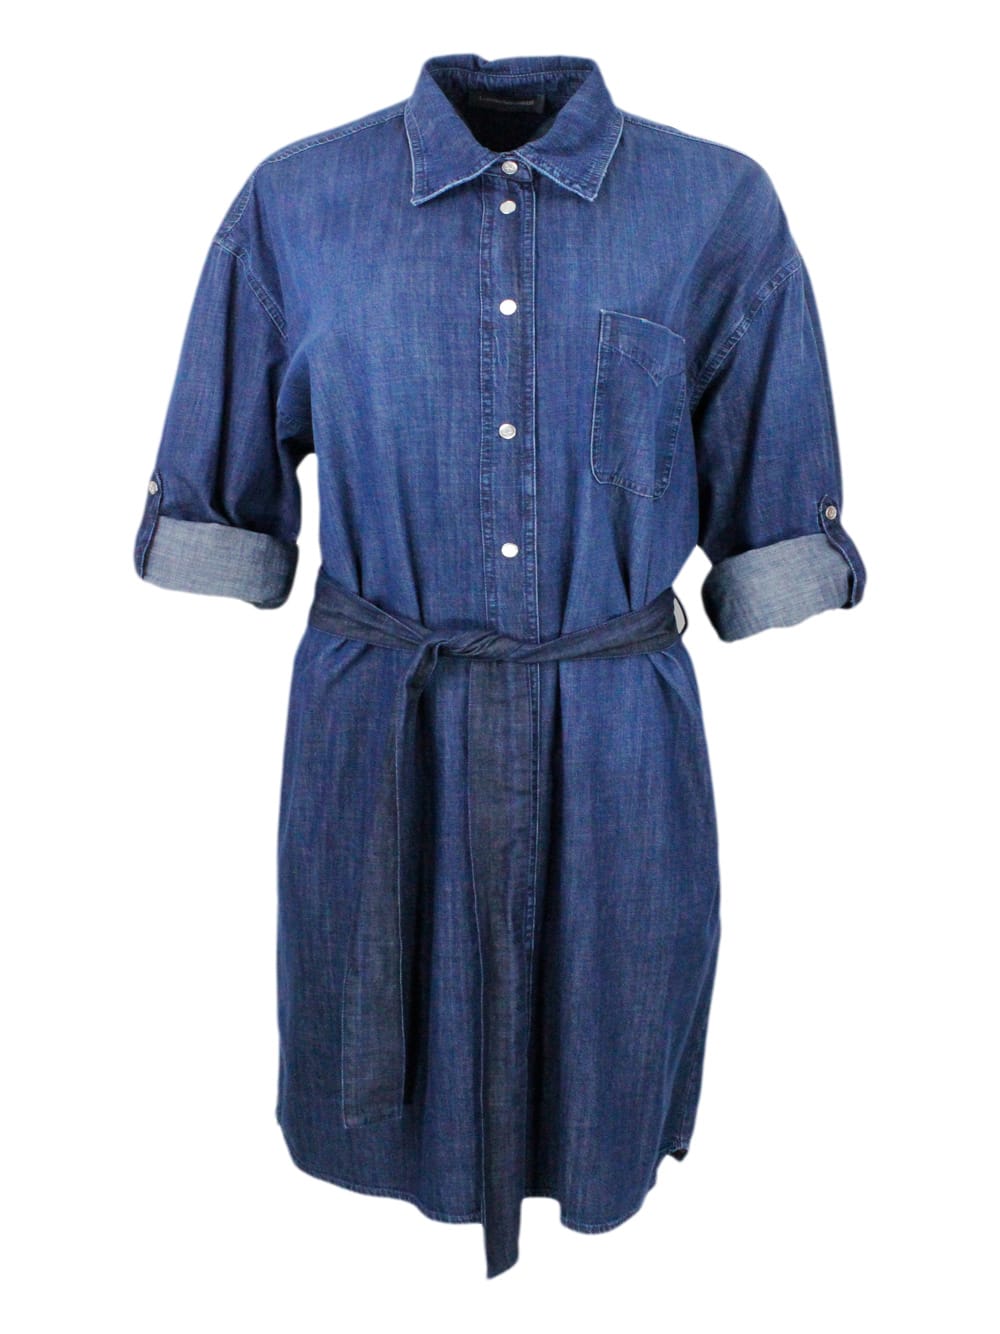 Shirt Dress In Light Chambray Denim Cotton With Long Sleeves With Button Closure And Belt At The Waist